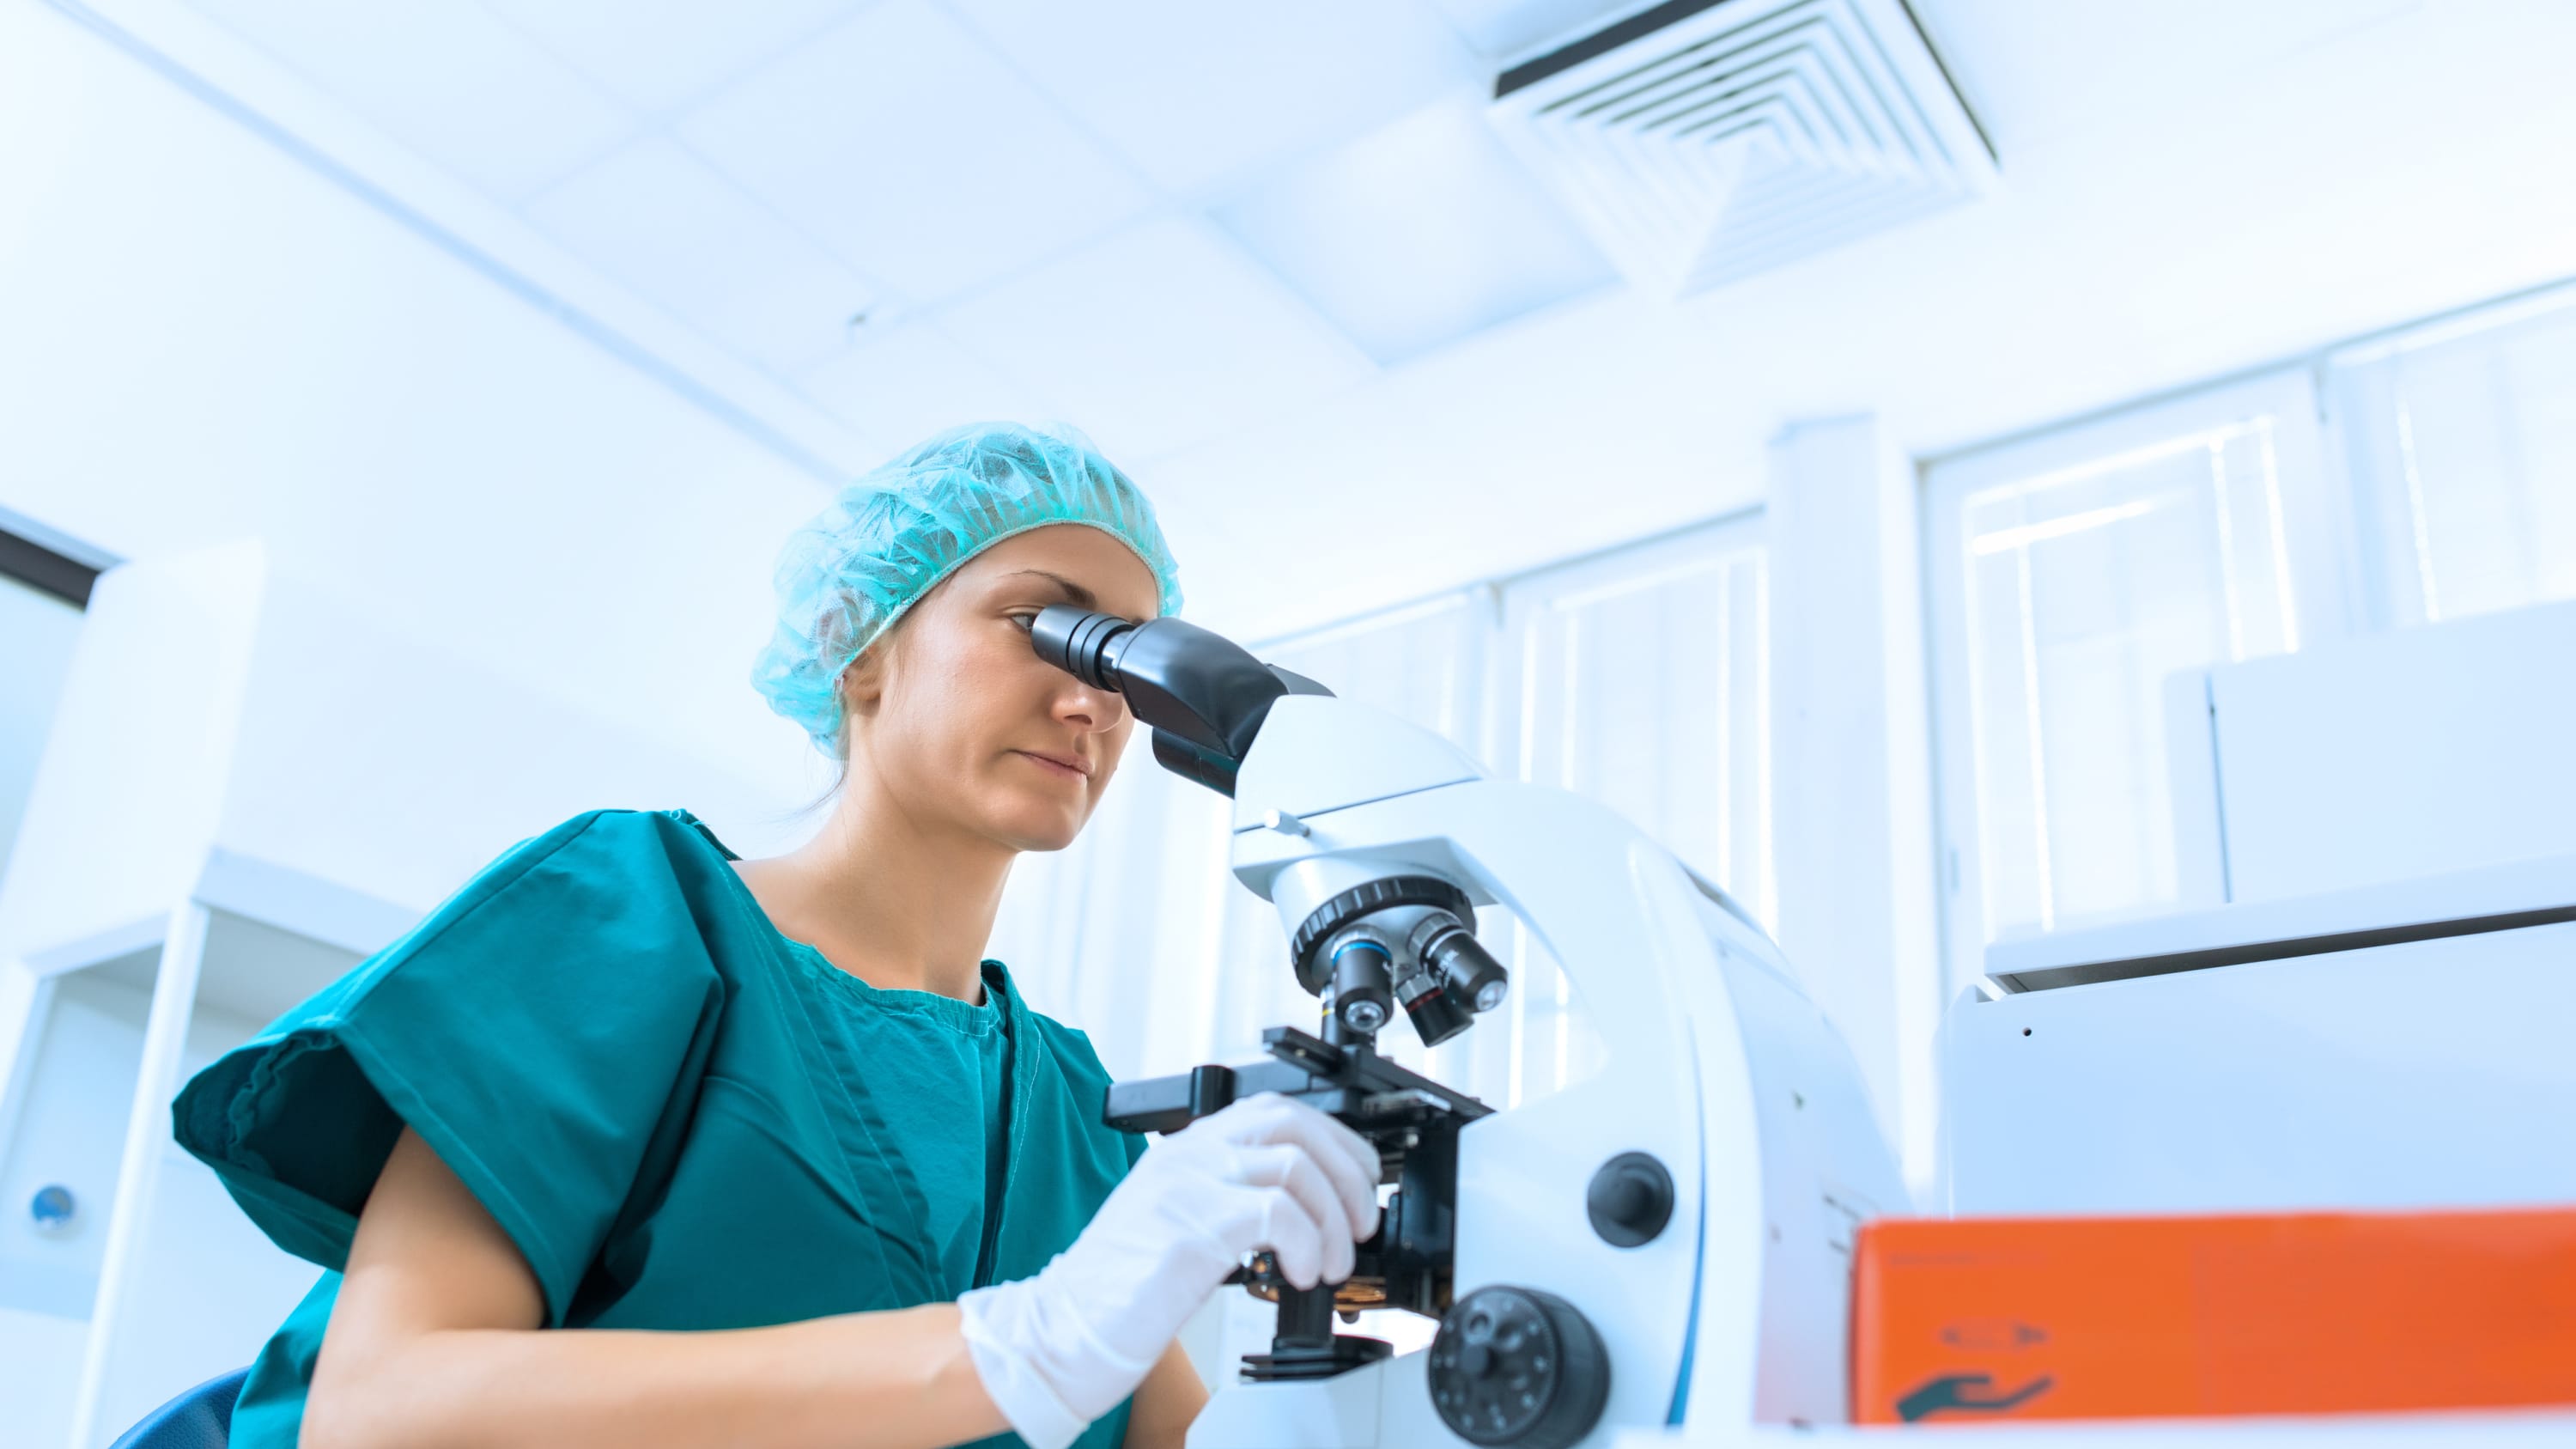 A lab technician looks into a microscope, possibly examining semen in a patient with male infertility.